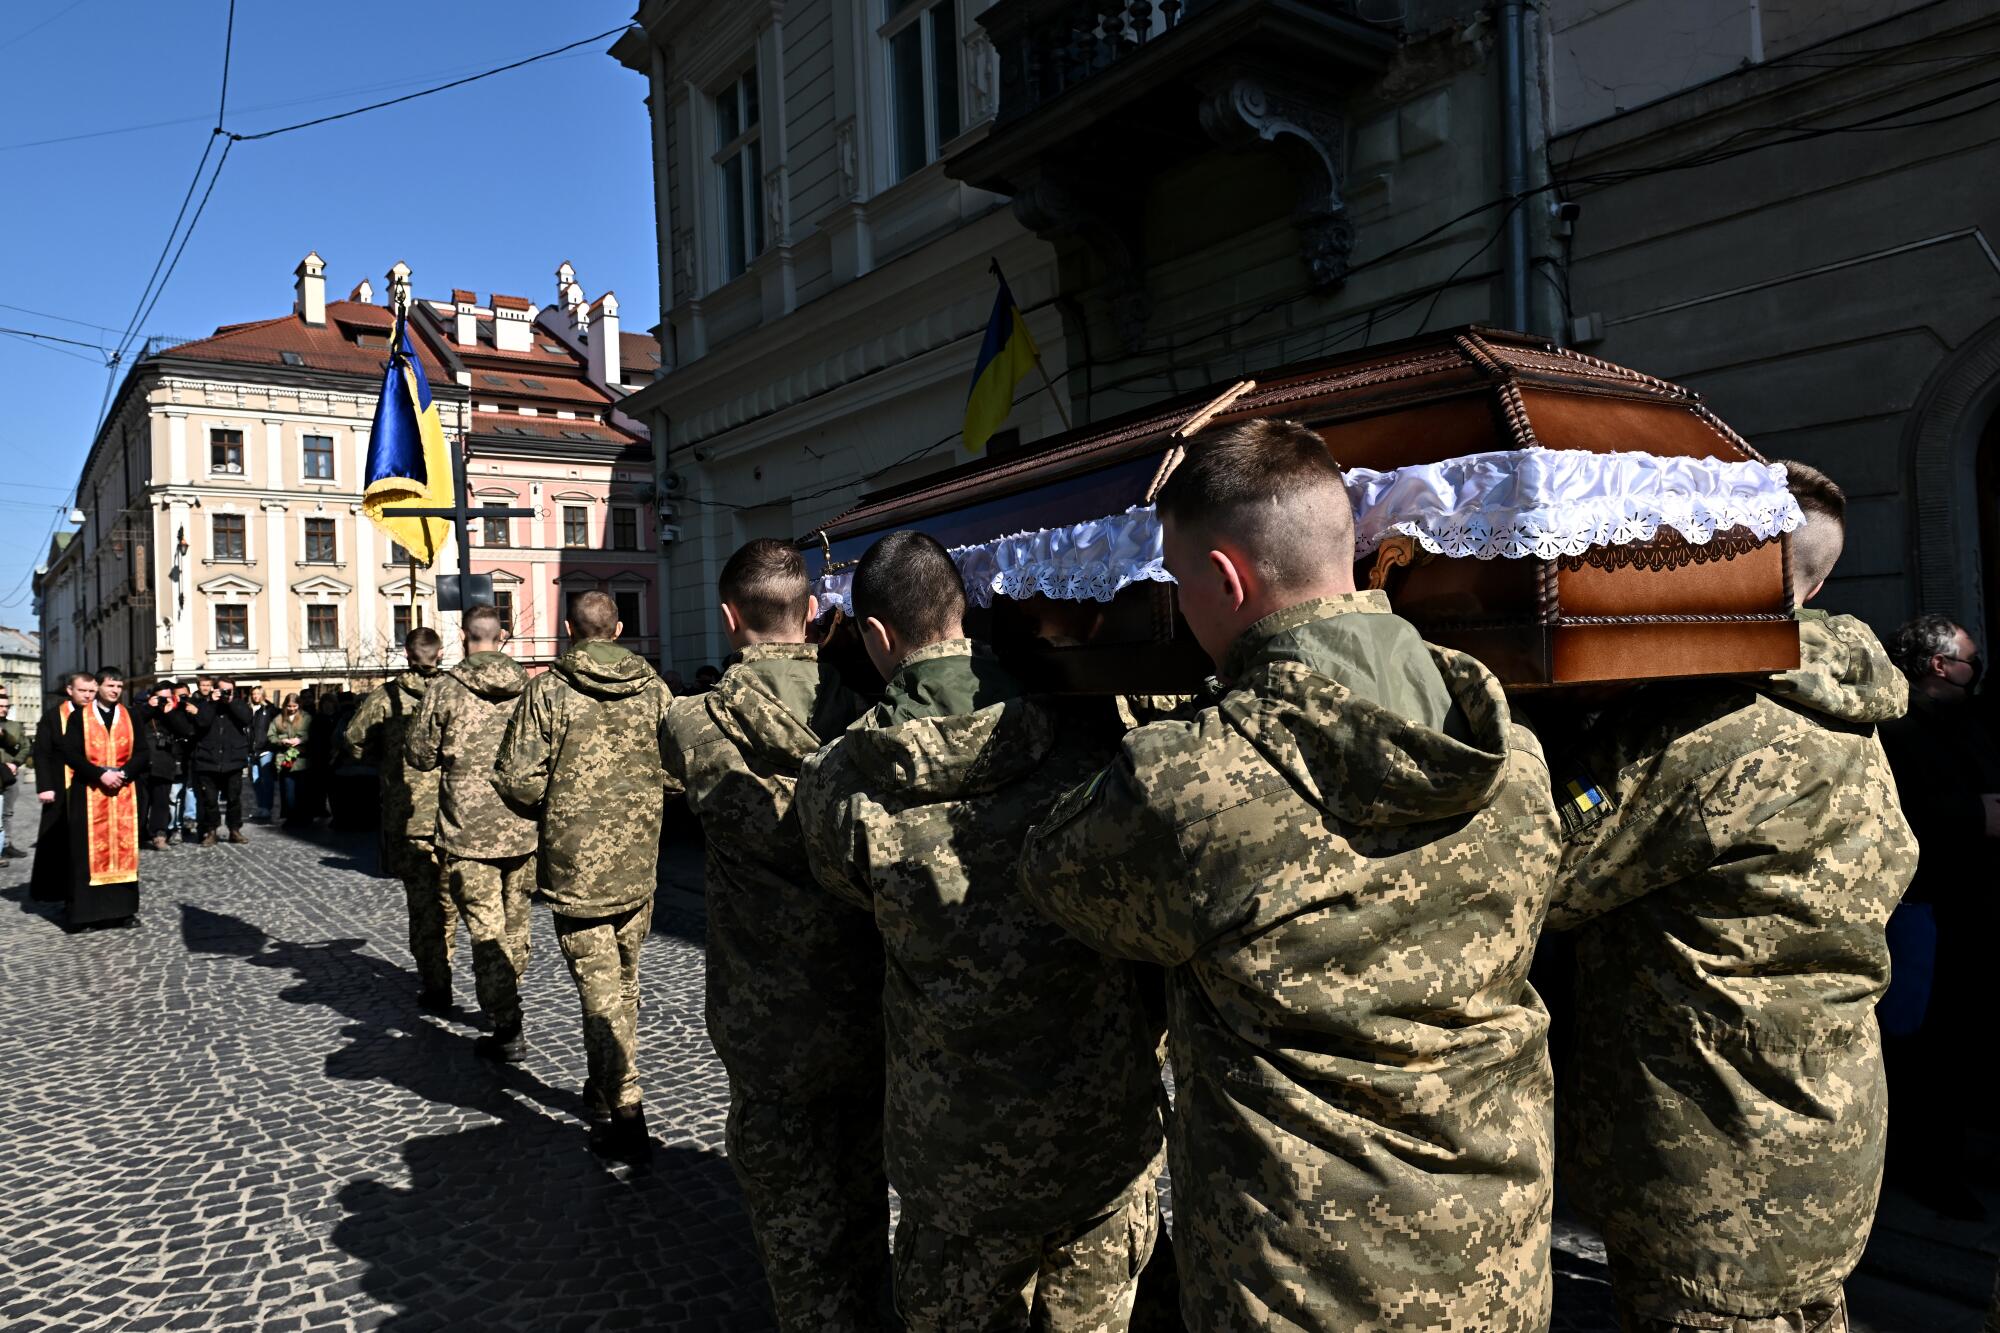 Ukrainian soldiers carry the casket of a comrade during a funeral outside the Church of St. Peter and Paul in Lviv, Ukraine